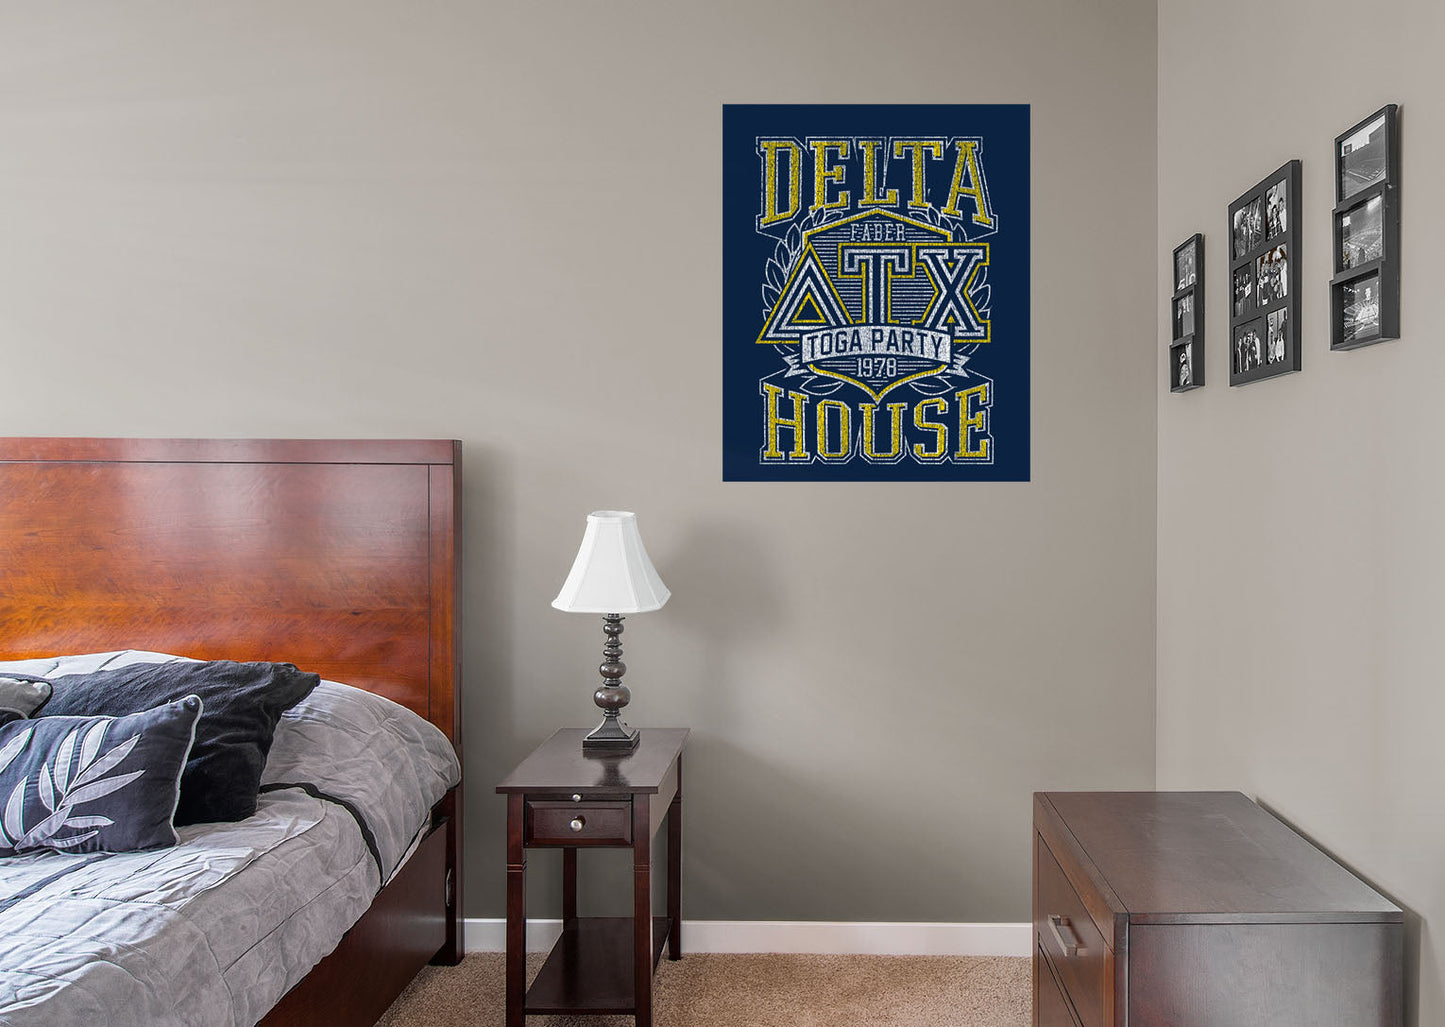 Animal House:  Delta House Mural        - Officially Licensed NBC Universal Removable Wall   Adhesive Decal